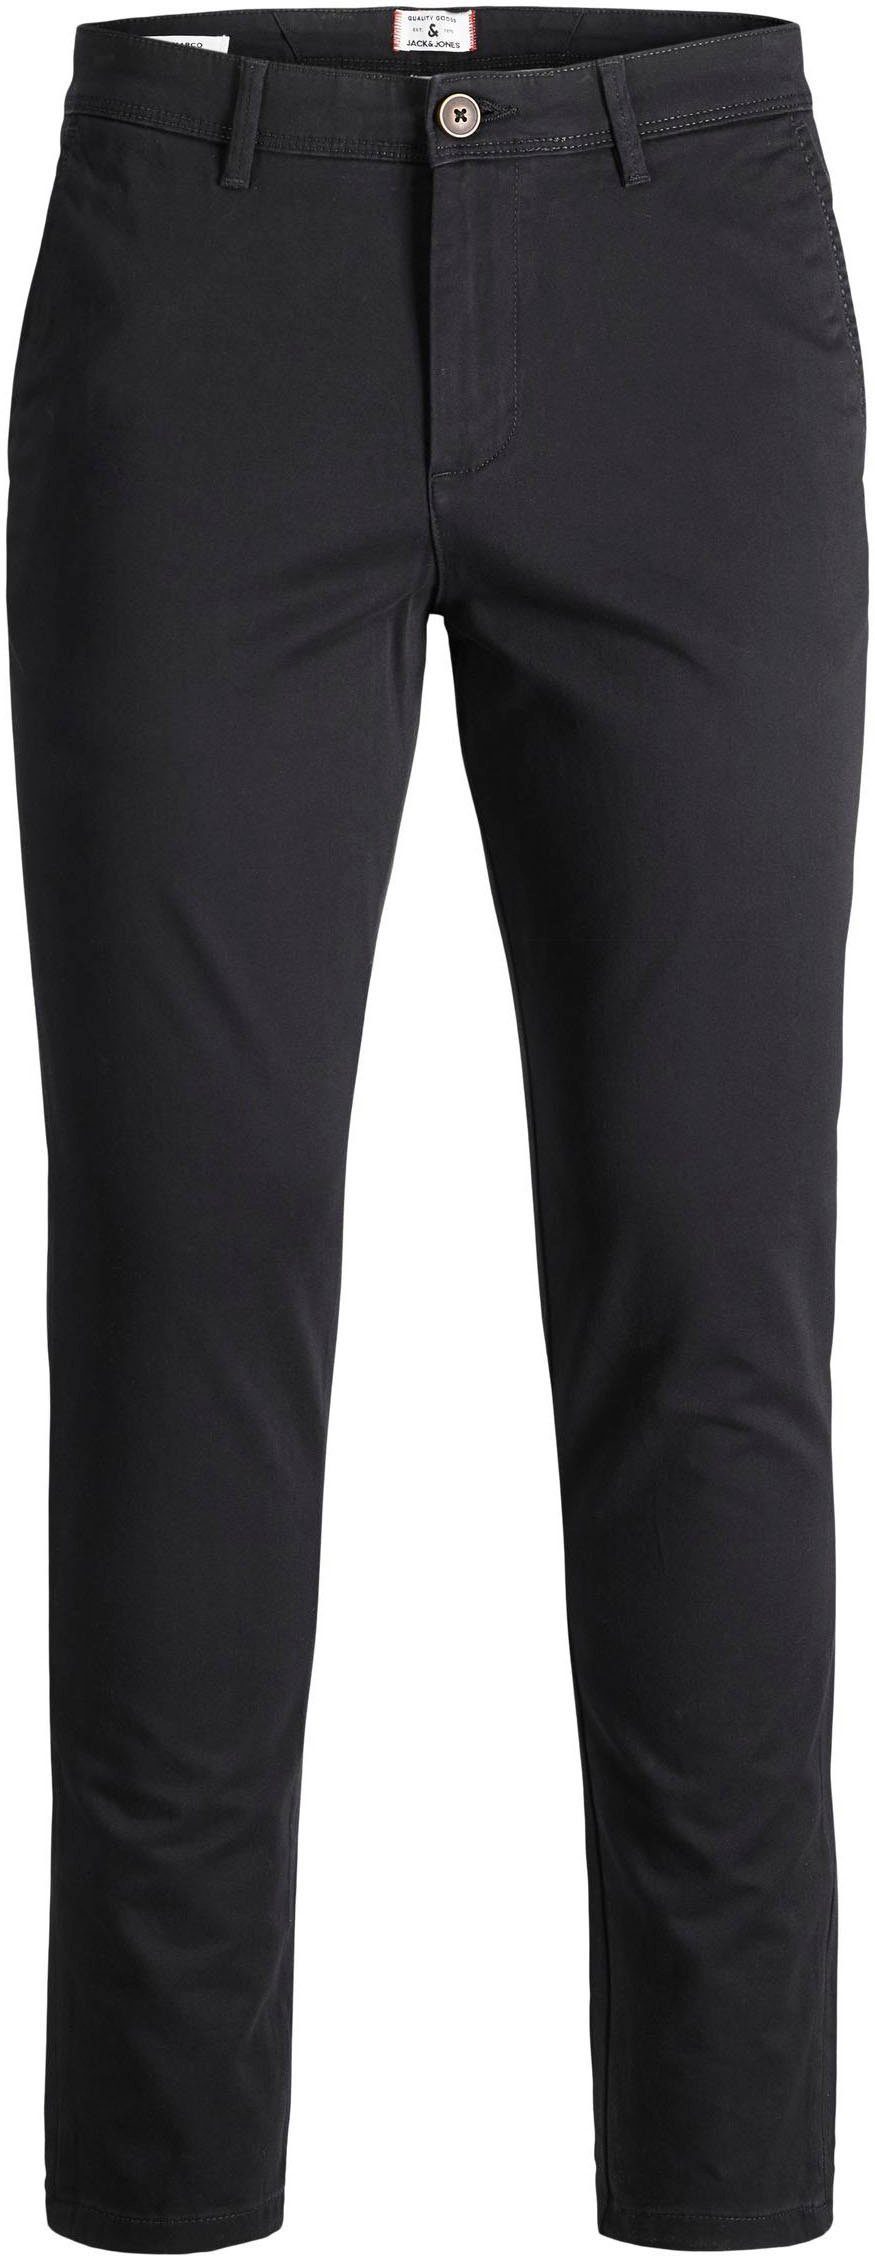 Jack MARCO & Jones black BOWIE PlusSize Chinohose (Packung)